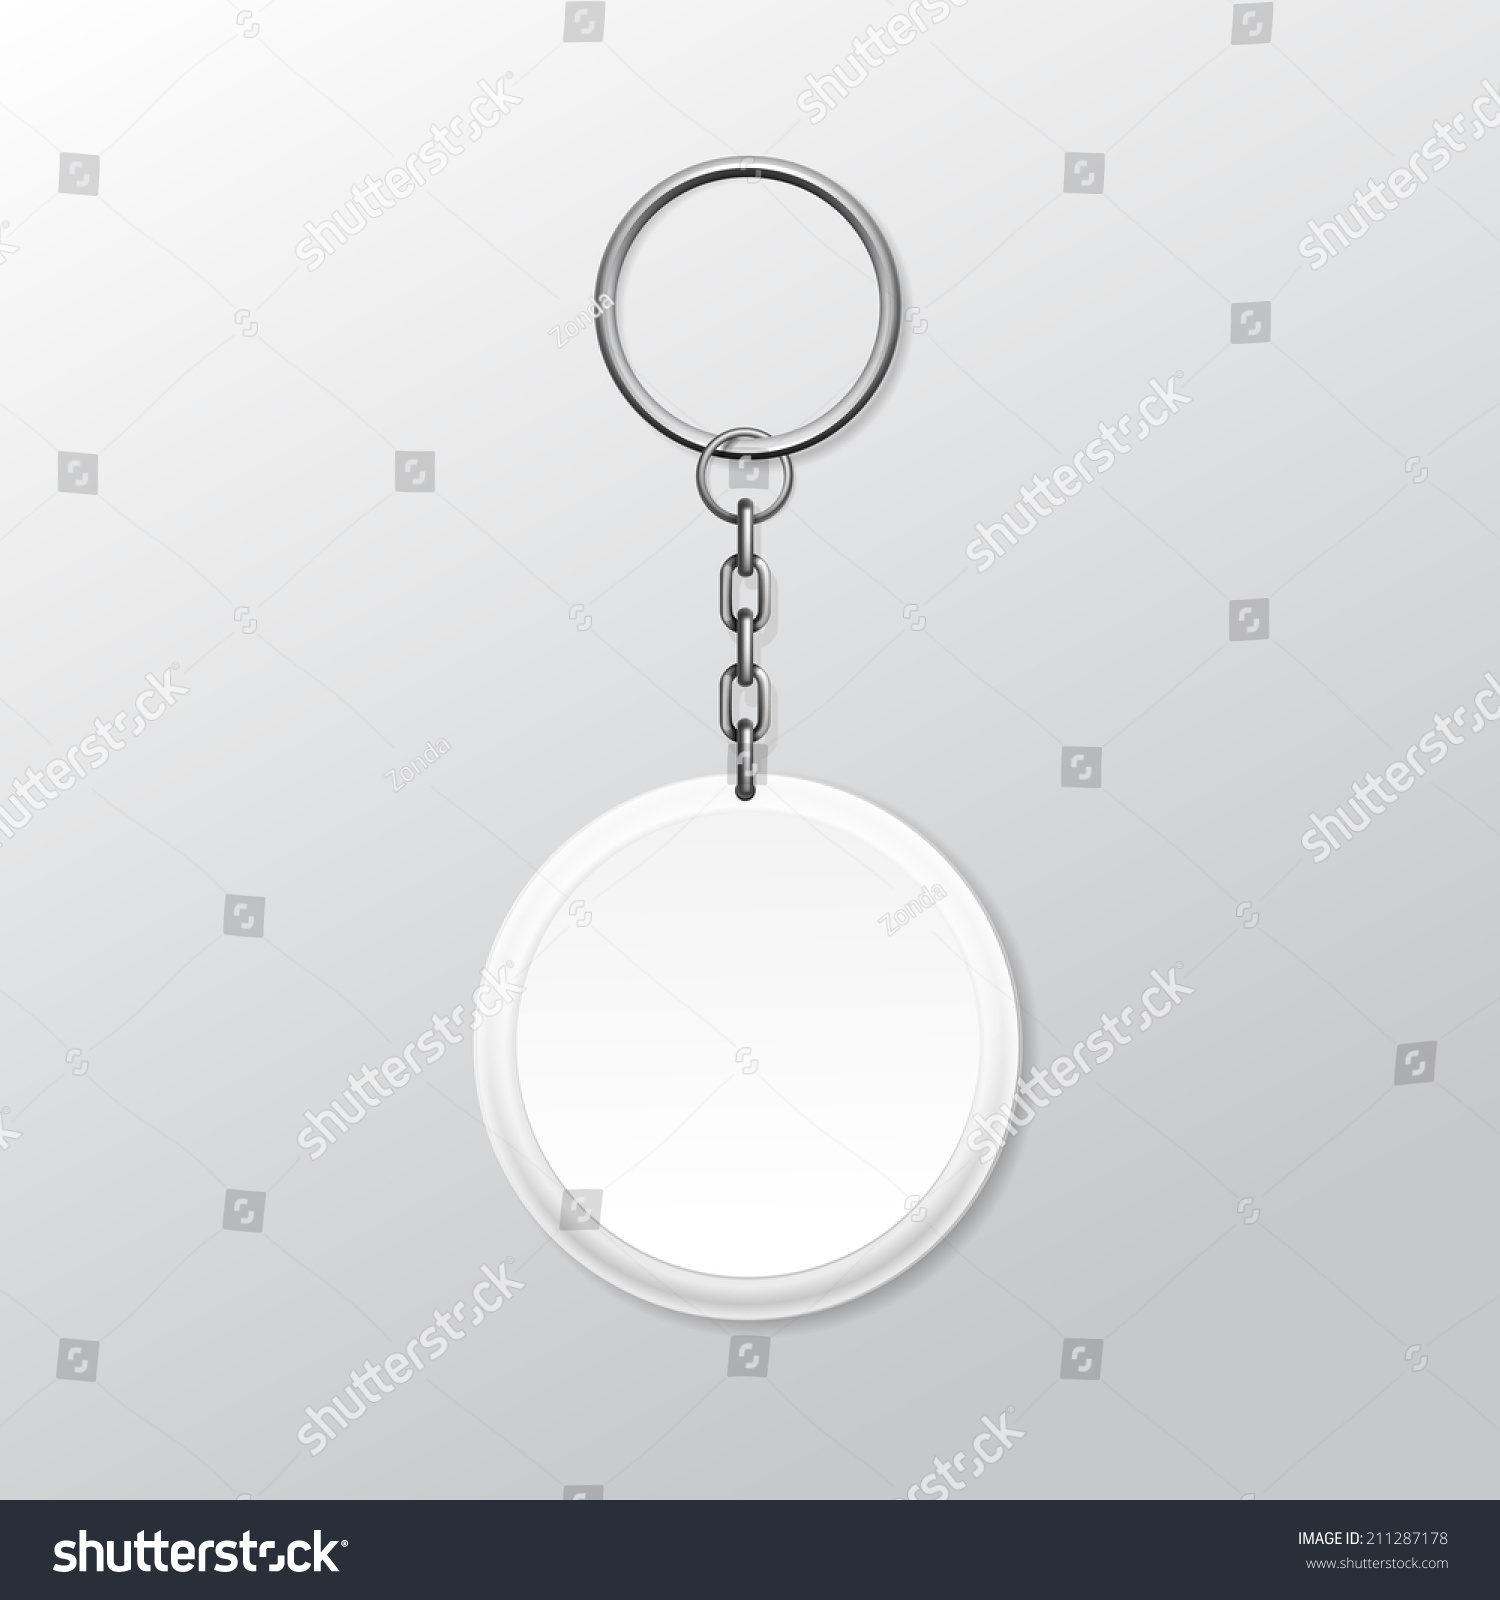 Download Vector Blank Round Keychain Ring Chain Stock Vector ...